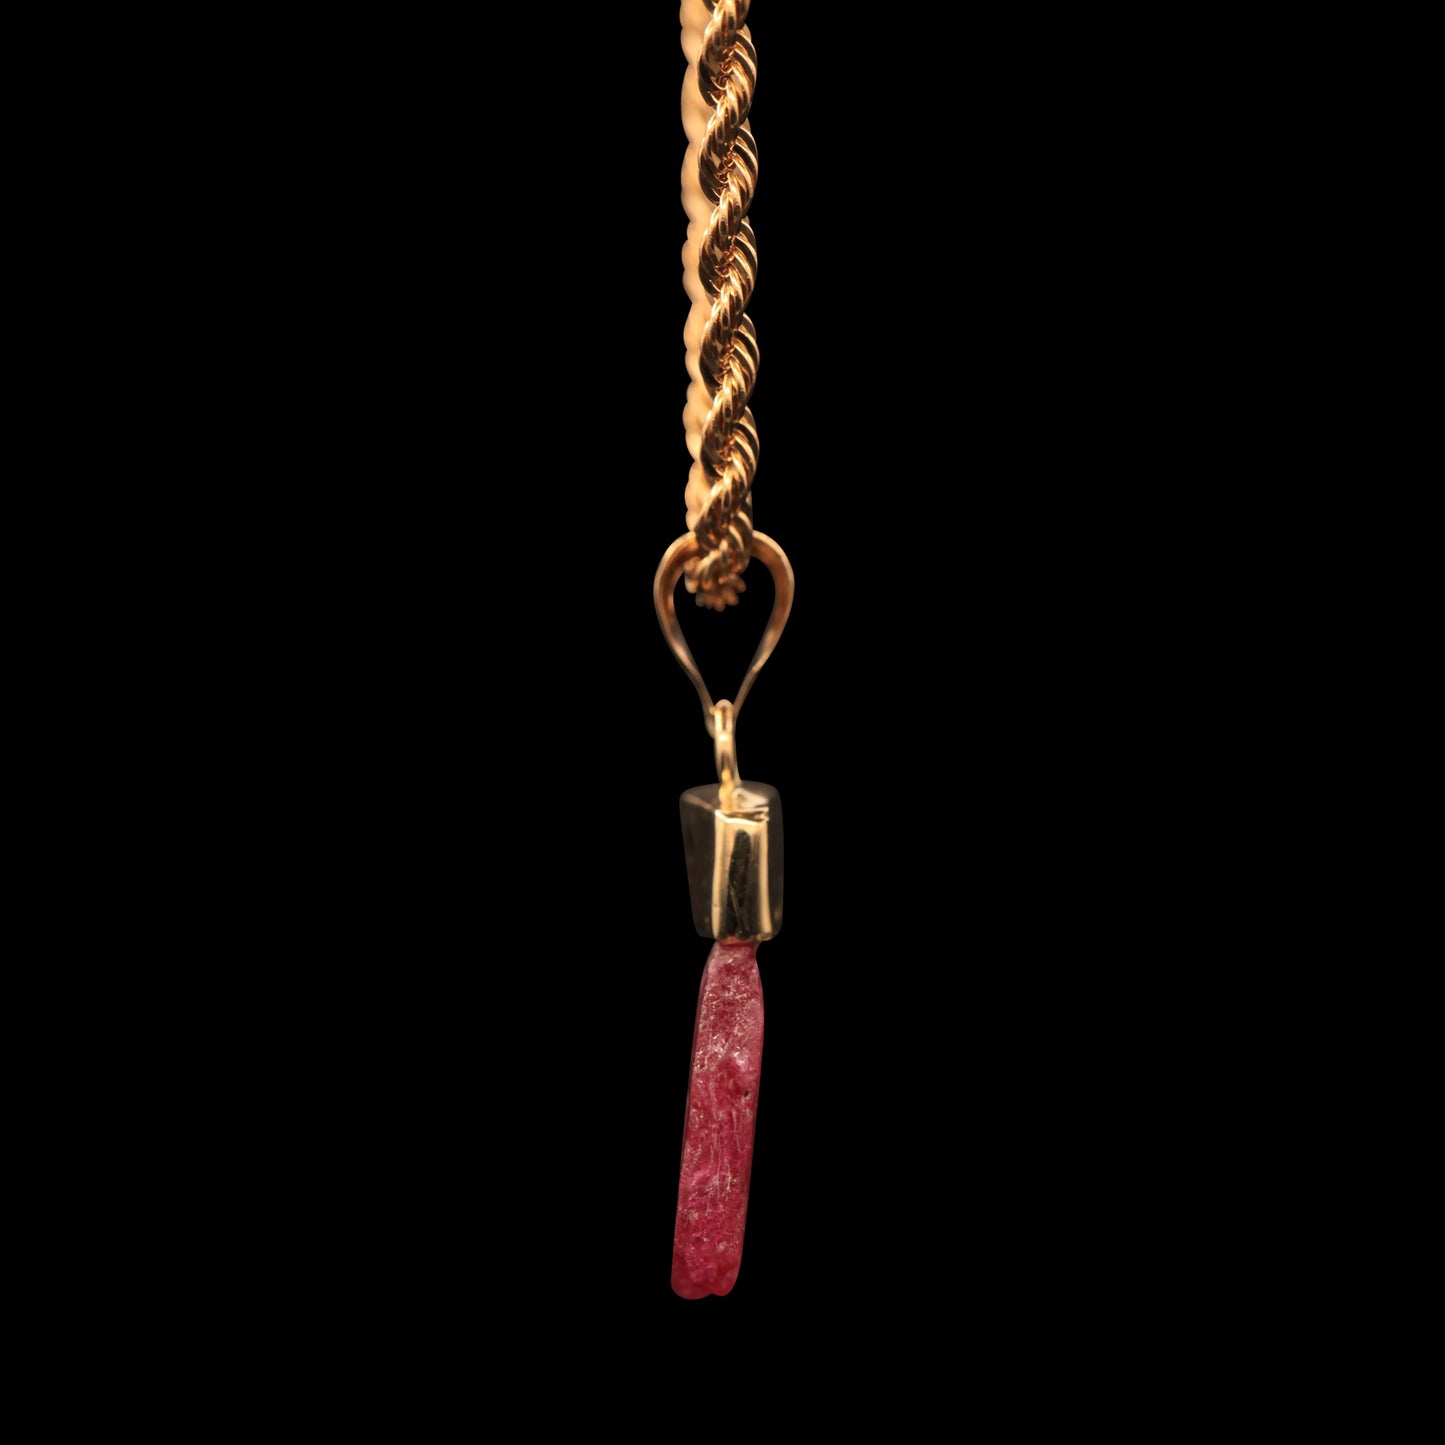 10.11 CARAT NATURAL UNTREATED TANZANIAN RUBY GEM ON ROPE